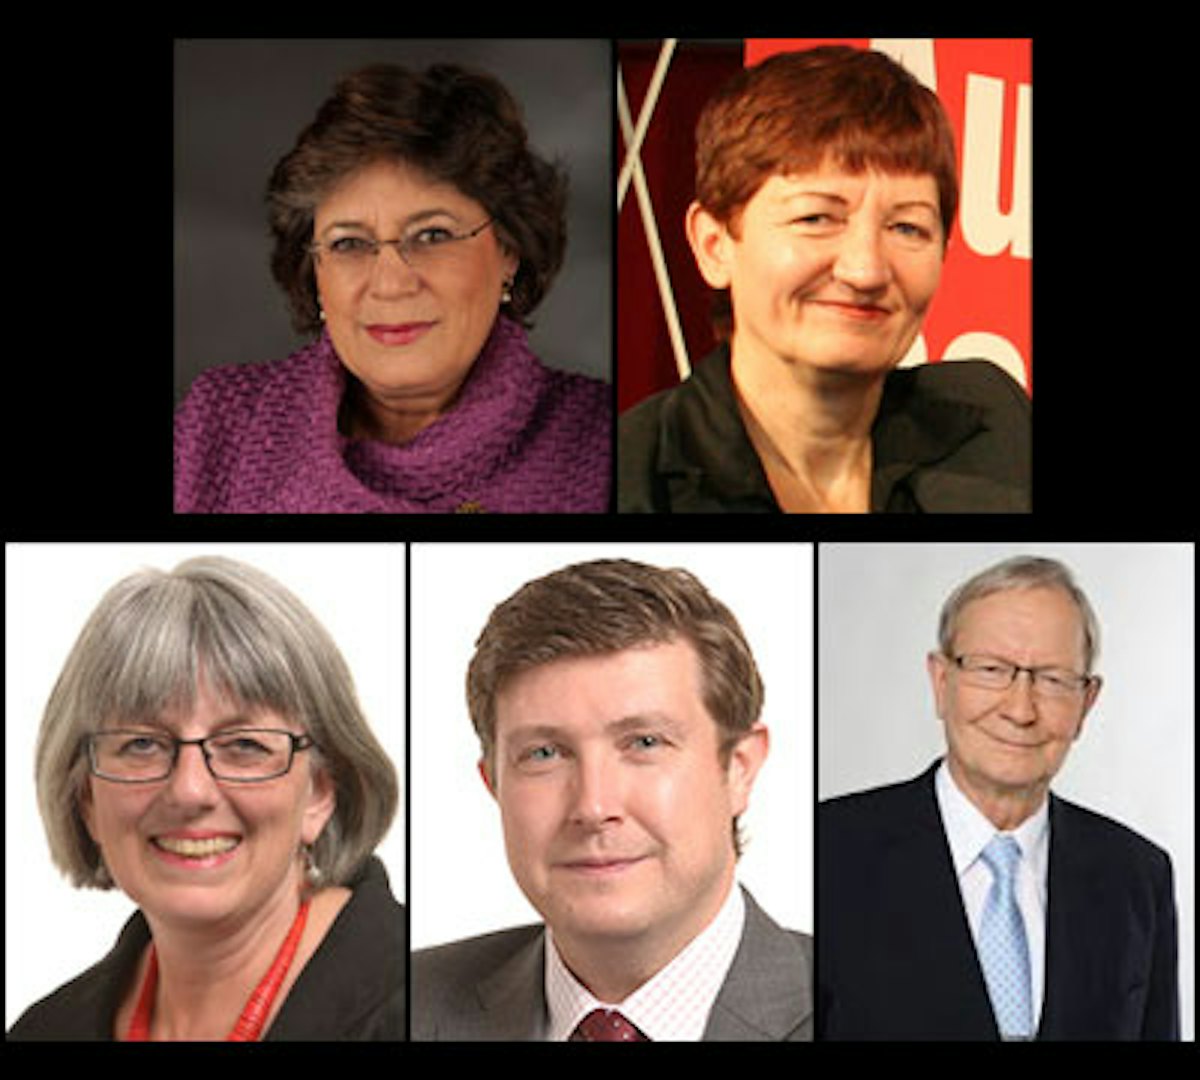 Members of the European Parliament: top from left, Ana Gomes of Portugal and Cornelia Ernst of Germany; bottom from left, Julie Ward and Andrew Lewer of the United Kingdom, and Tunne Kelam of Estonia (bottom right)